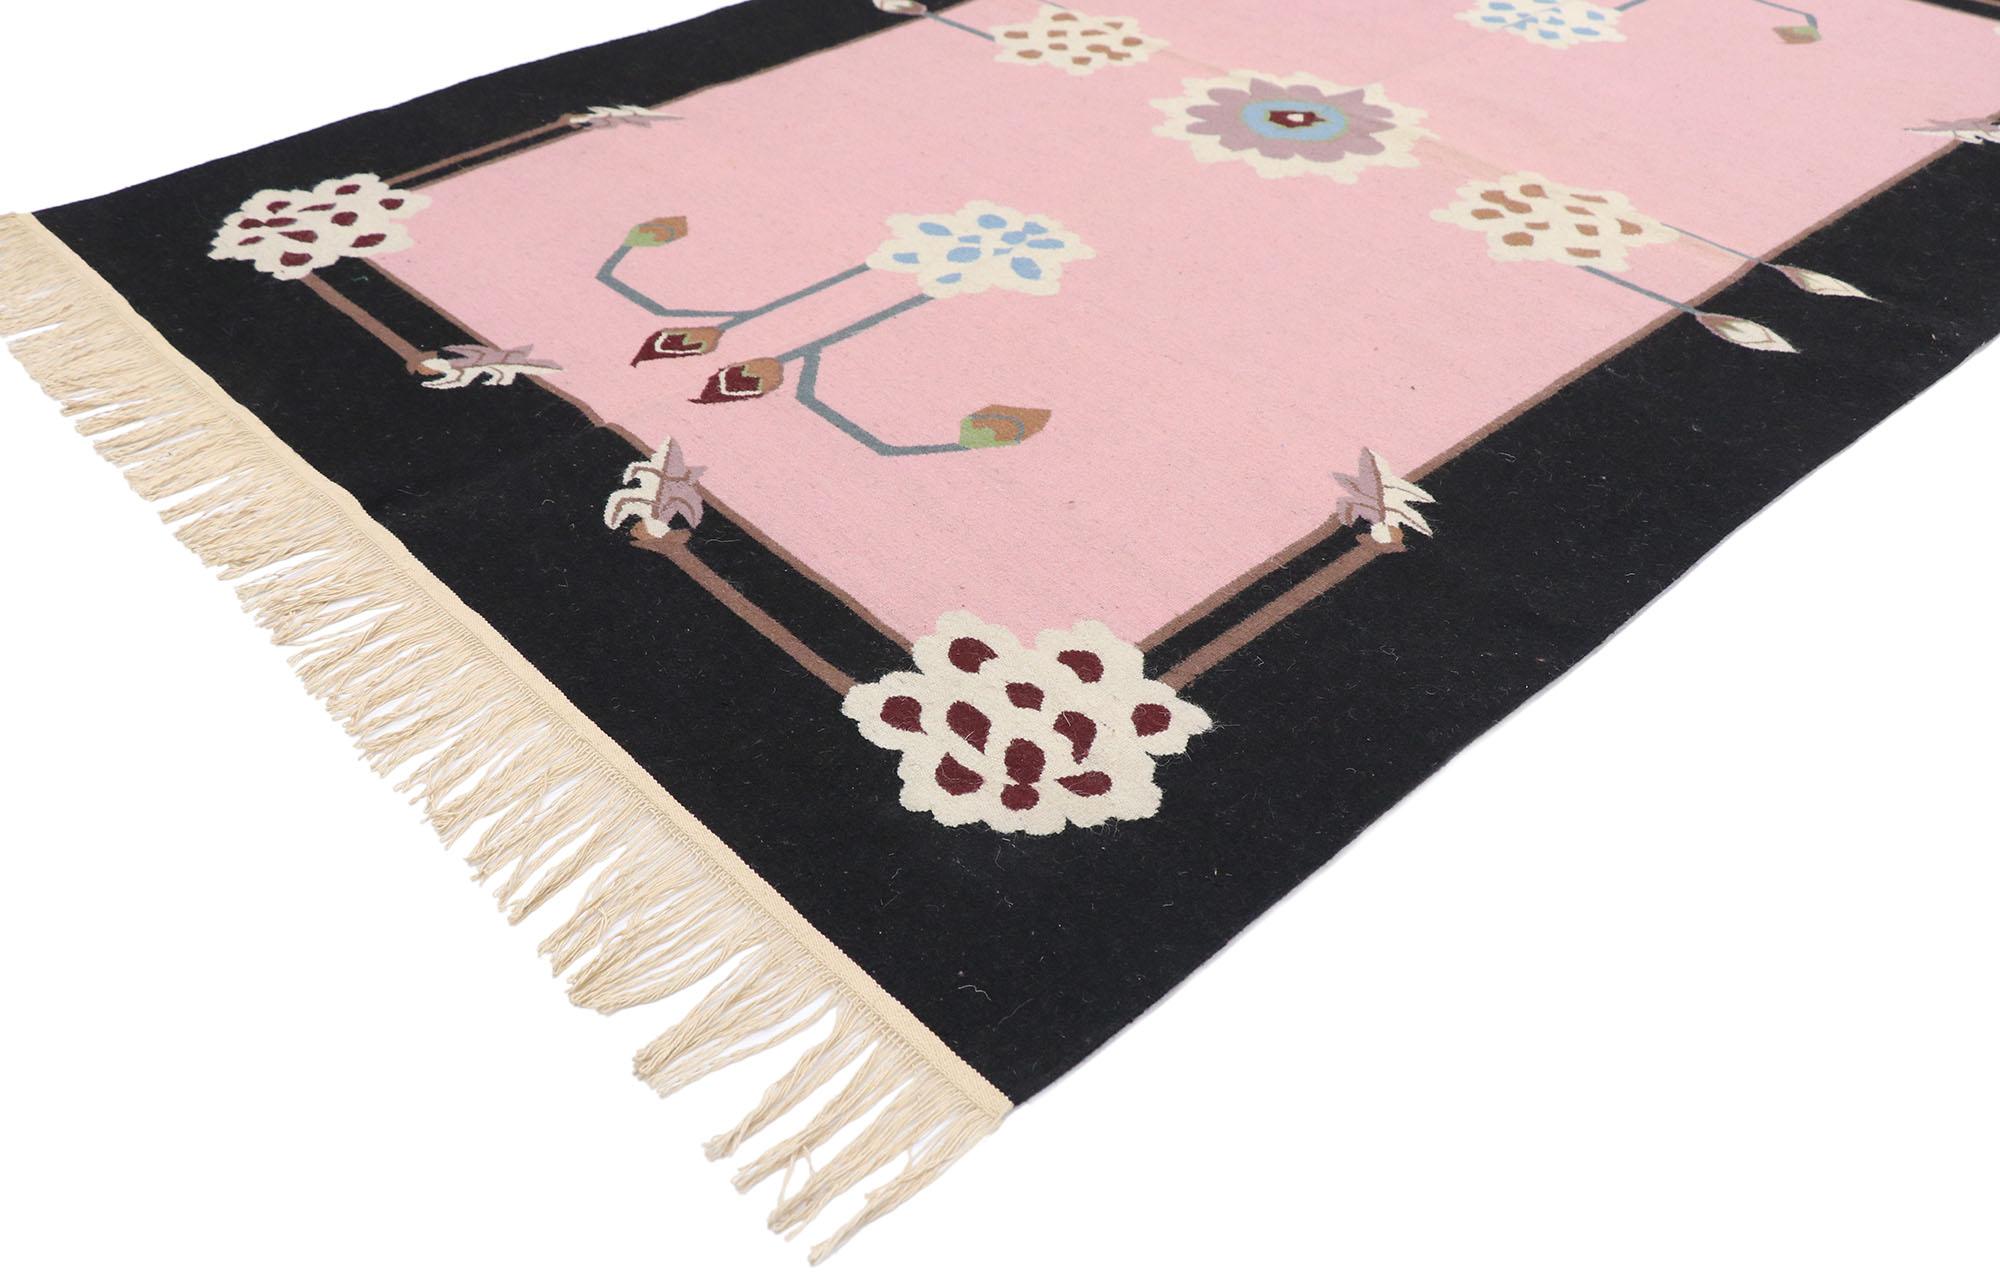 77814 vintage Chinese Floral Kilim rug 04'02 x 06'03. This hand-woven wool vintage Chinese kilim rug features a color blocked field and border festooned with gorgeous floral motifs. Four chrysanthemums and buds elegantly float in the field around a